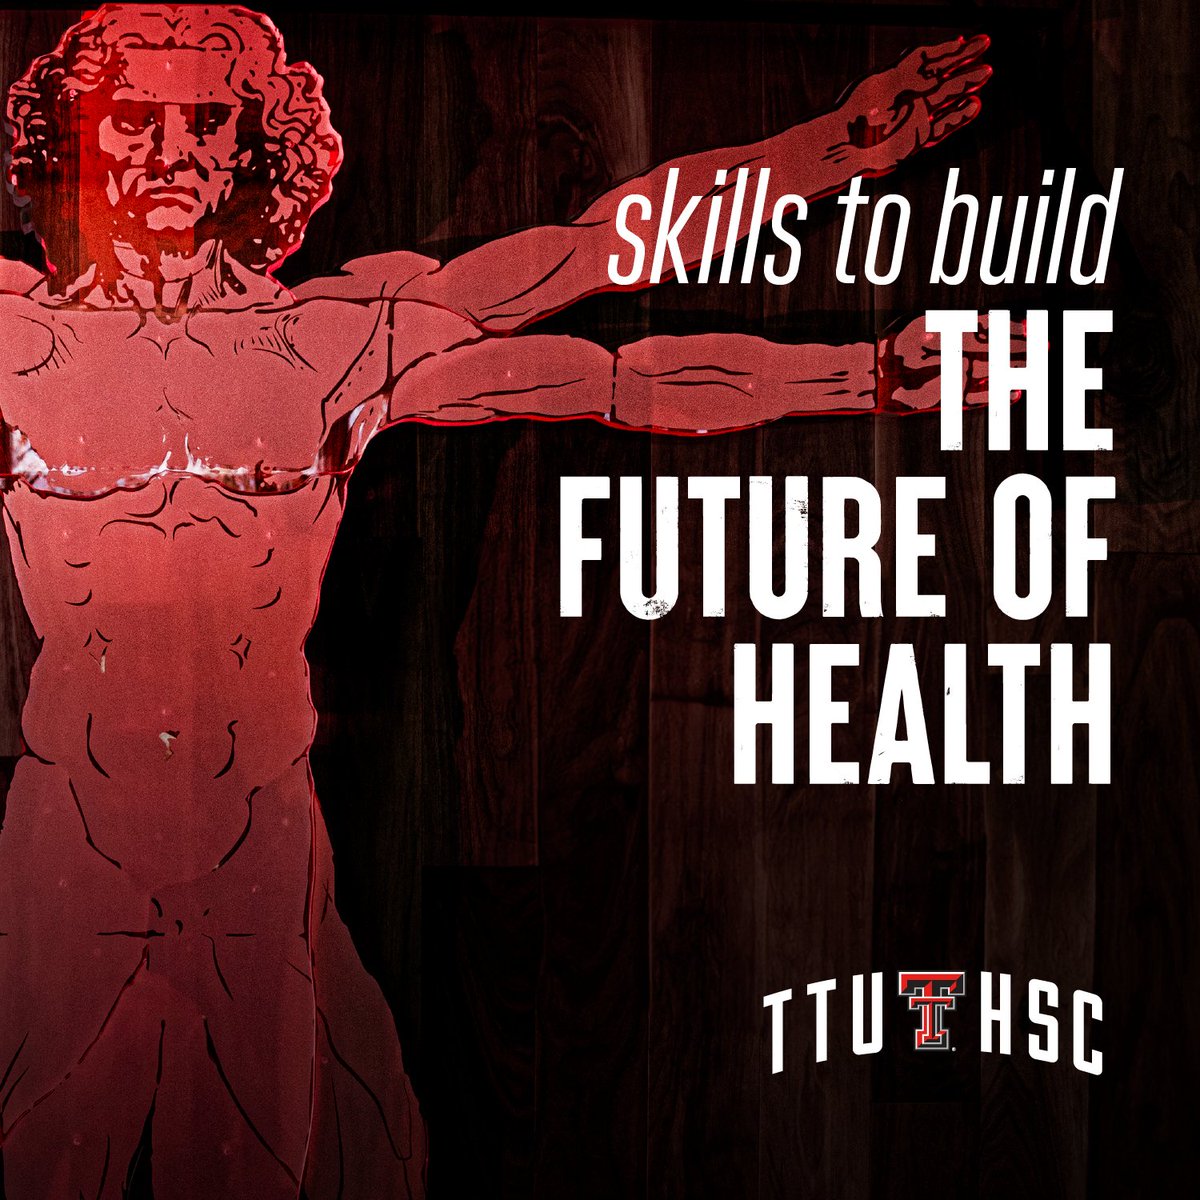 𝘚𝘬𝘪𝘭𝘭𝘴 𝘵𝘰 𝘣𝘶𝘪𝘭𝘥 𝗧𝗛𝗘 𝗙𝗨𝗧𝗨𝗥𝗘 𝗢𝗙 𝗛𝗘𝗔𝗟𝗧𝗛. The TTUHSC Institute of Anatomical Sciences promotes interdisciplinary anatomical education, research and outreach missions of all schools of Texas Tech University Health Sciences Center. #TTUHSCfuture